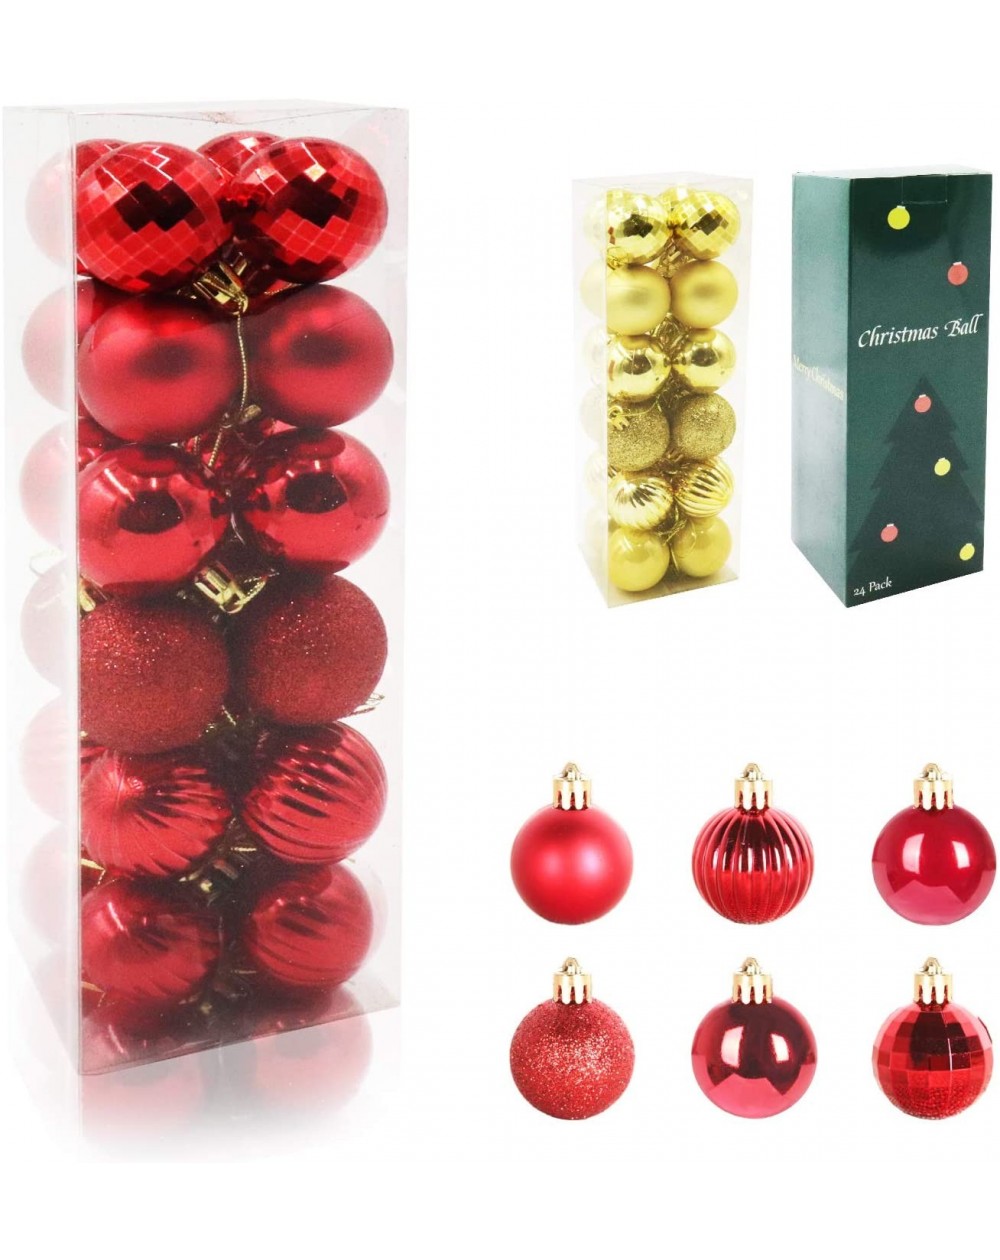 Ornaments 24PCS Christmas Ball Ornaments 1.57"- 6 Types Shatterproof Christmas Tree Decorations Hanging for Holiday Wedding P...